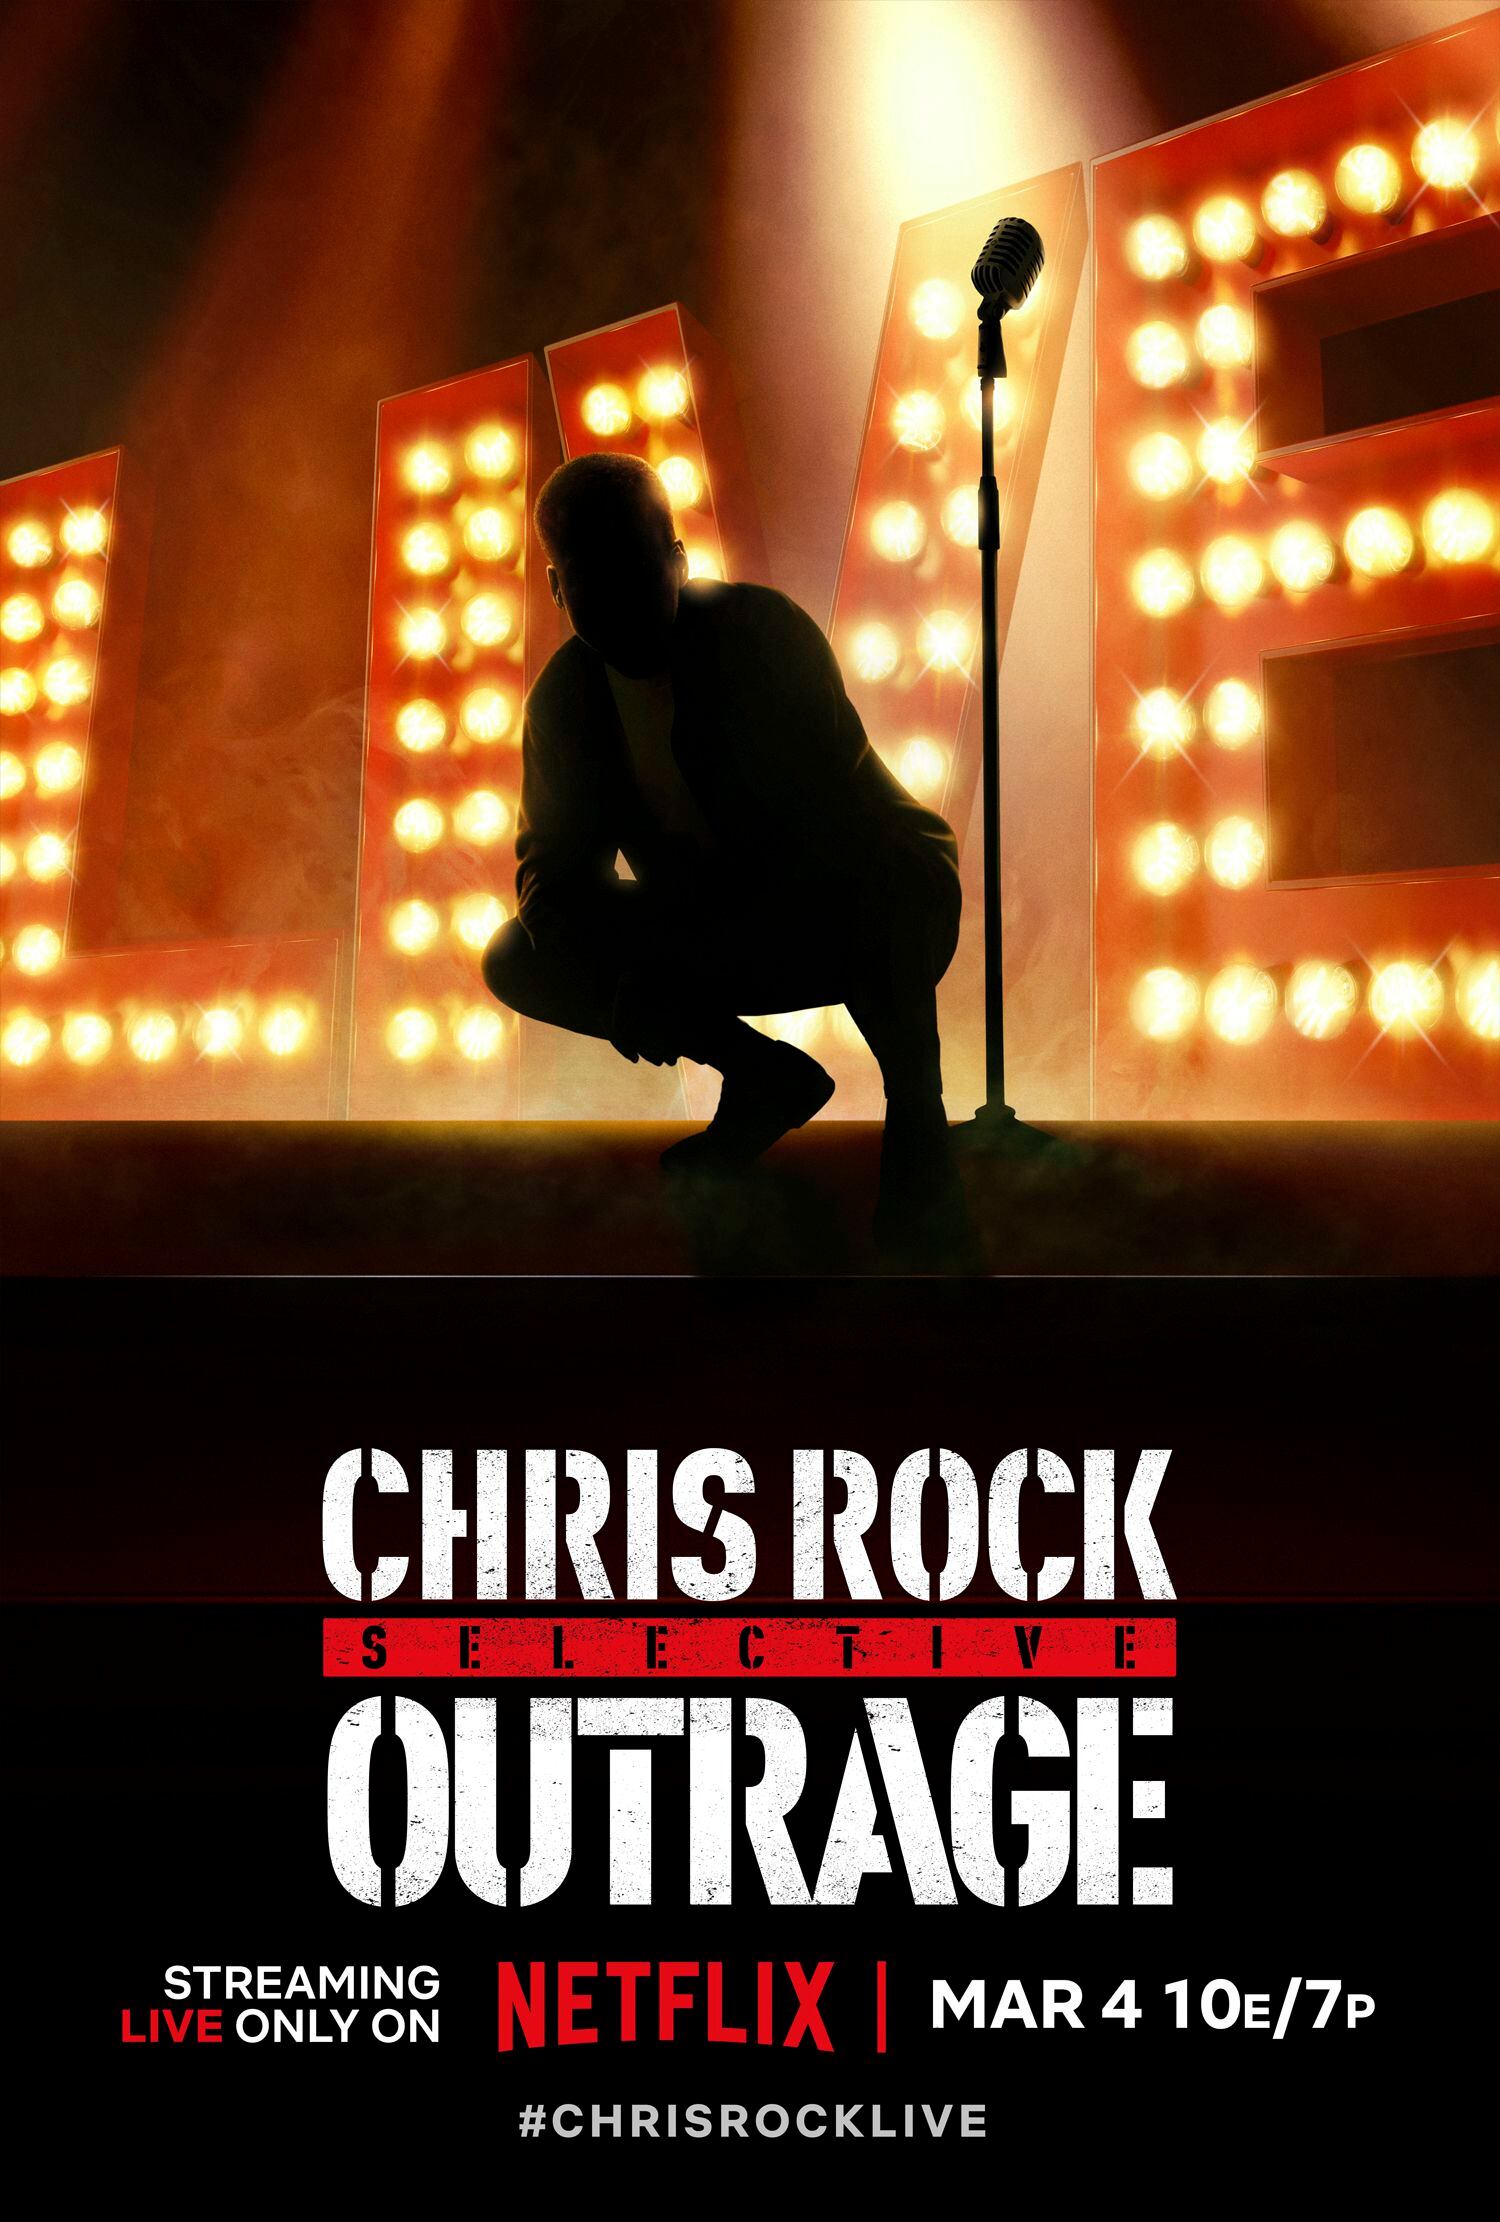 Chris Rock to finally have his say in new stand-up special